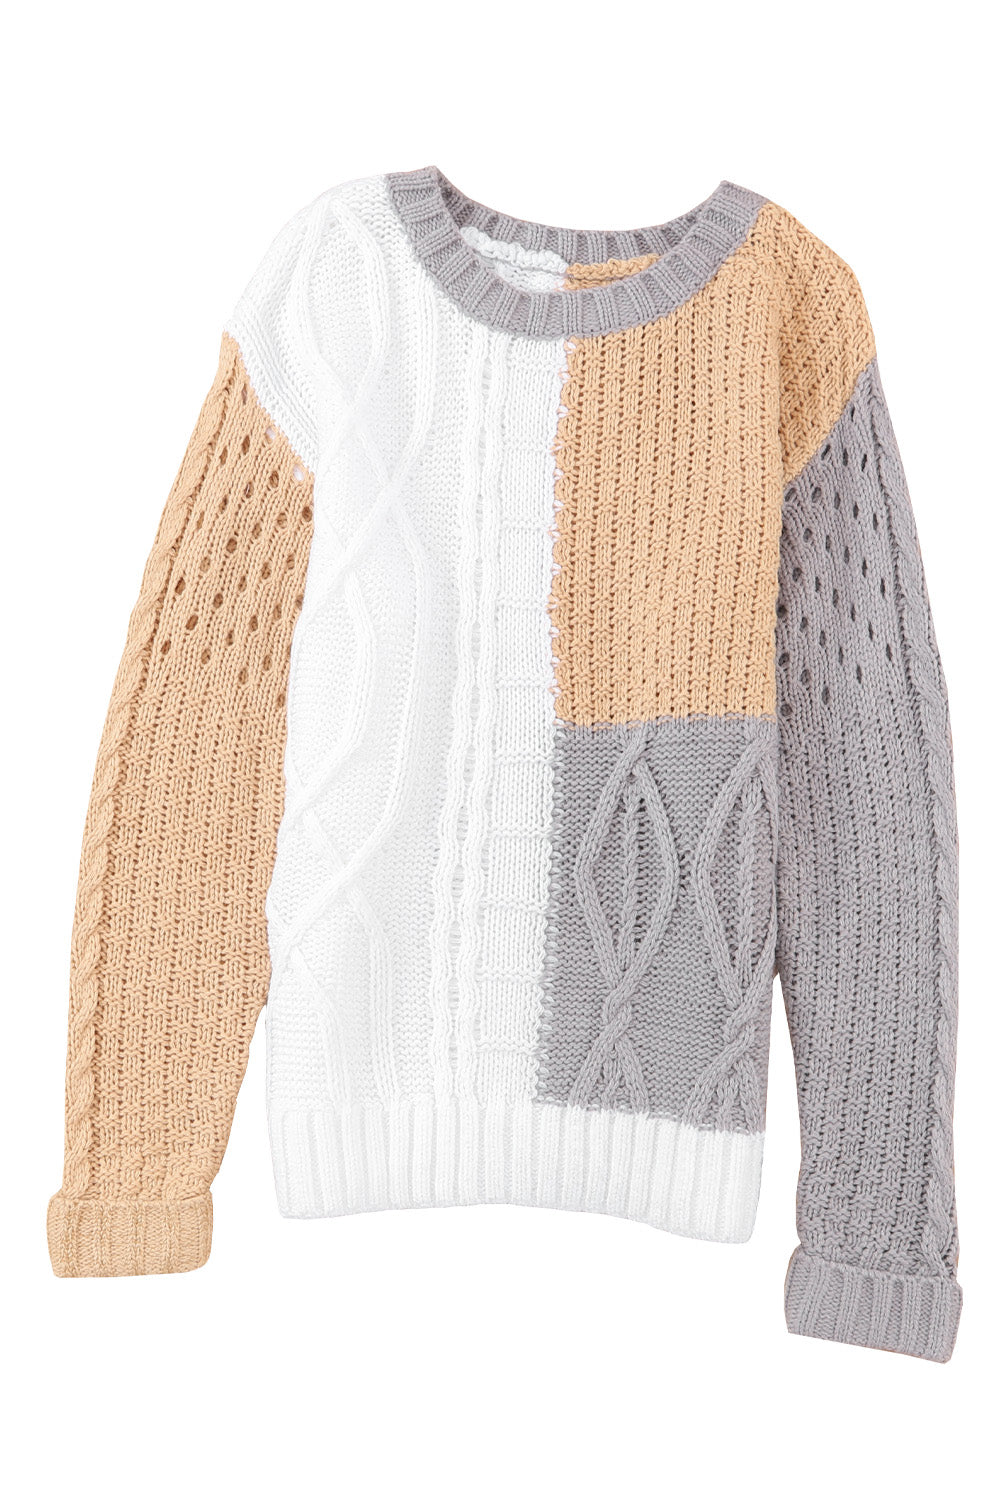 Brown Colorblock Mixed Textured Sweater